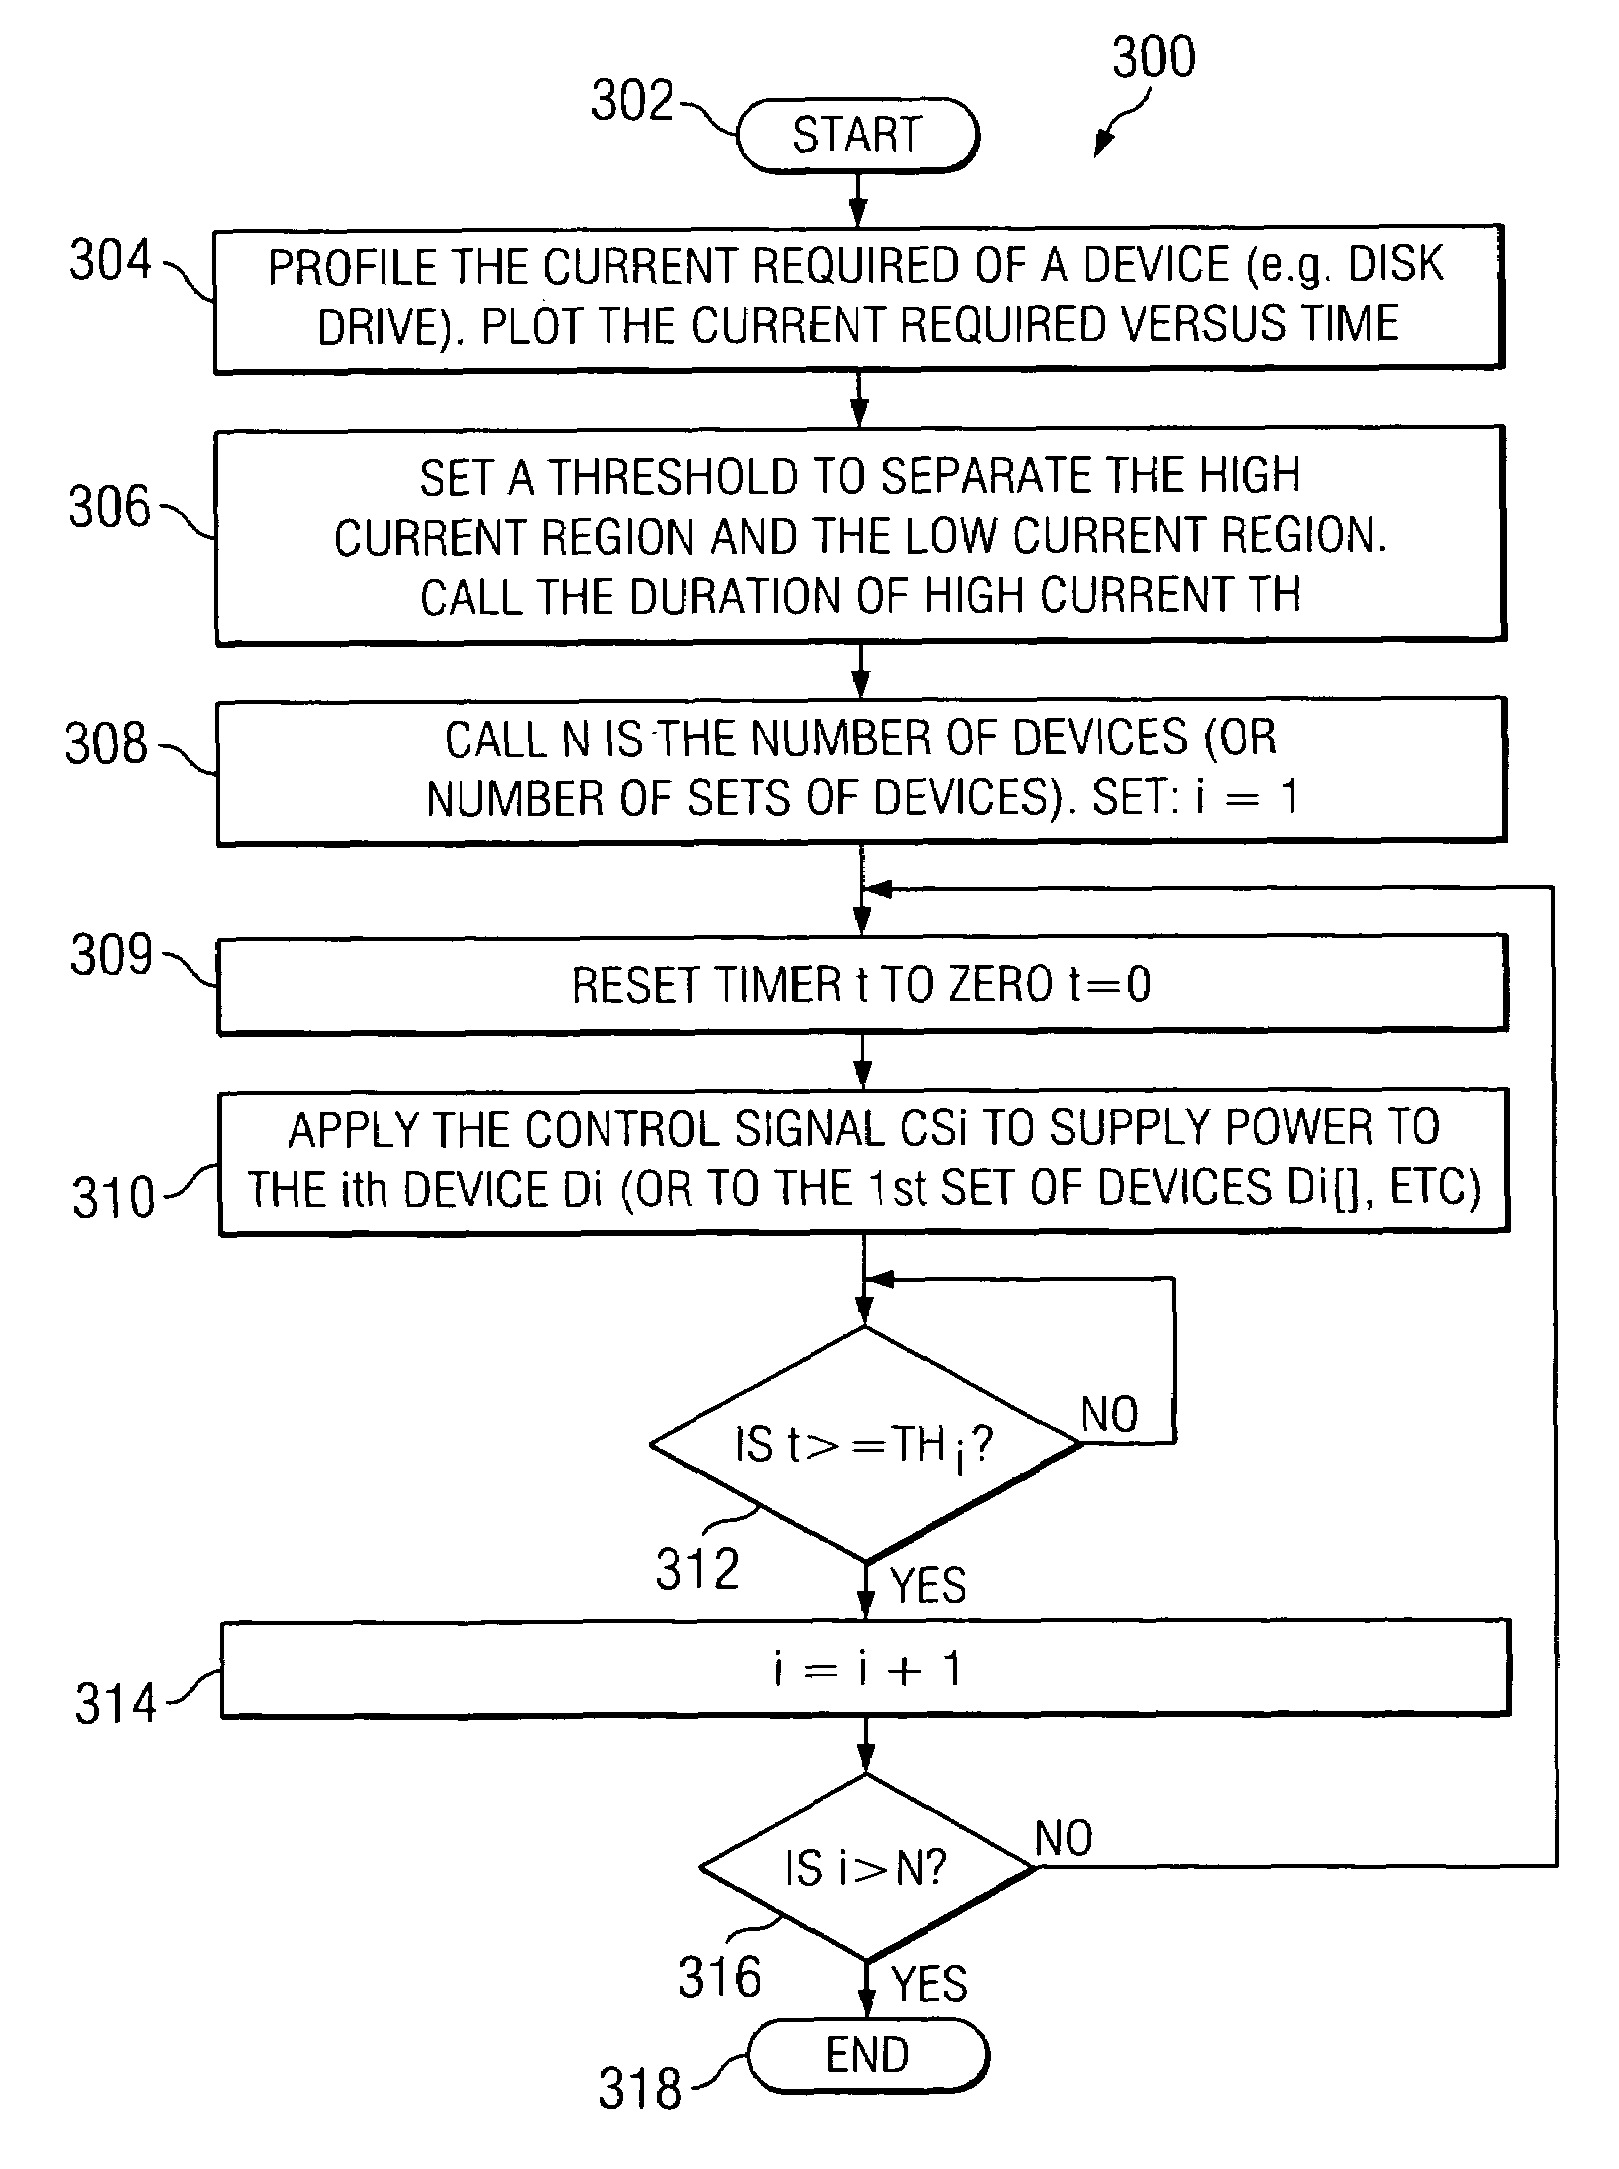 Method and apparatus for controlling power sequencing of a plurality of electrical/electronic devices